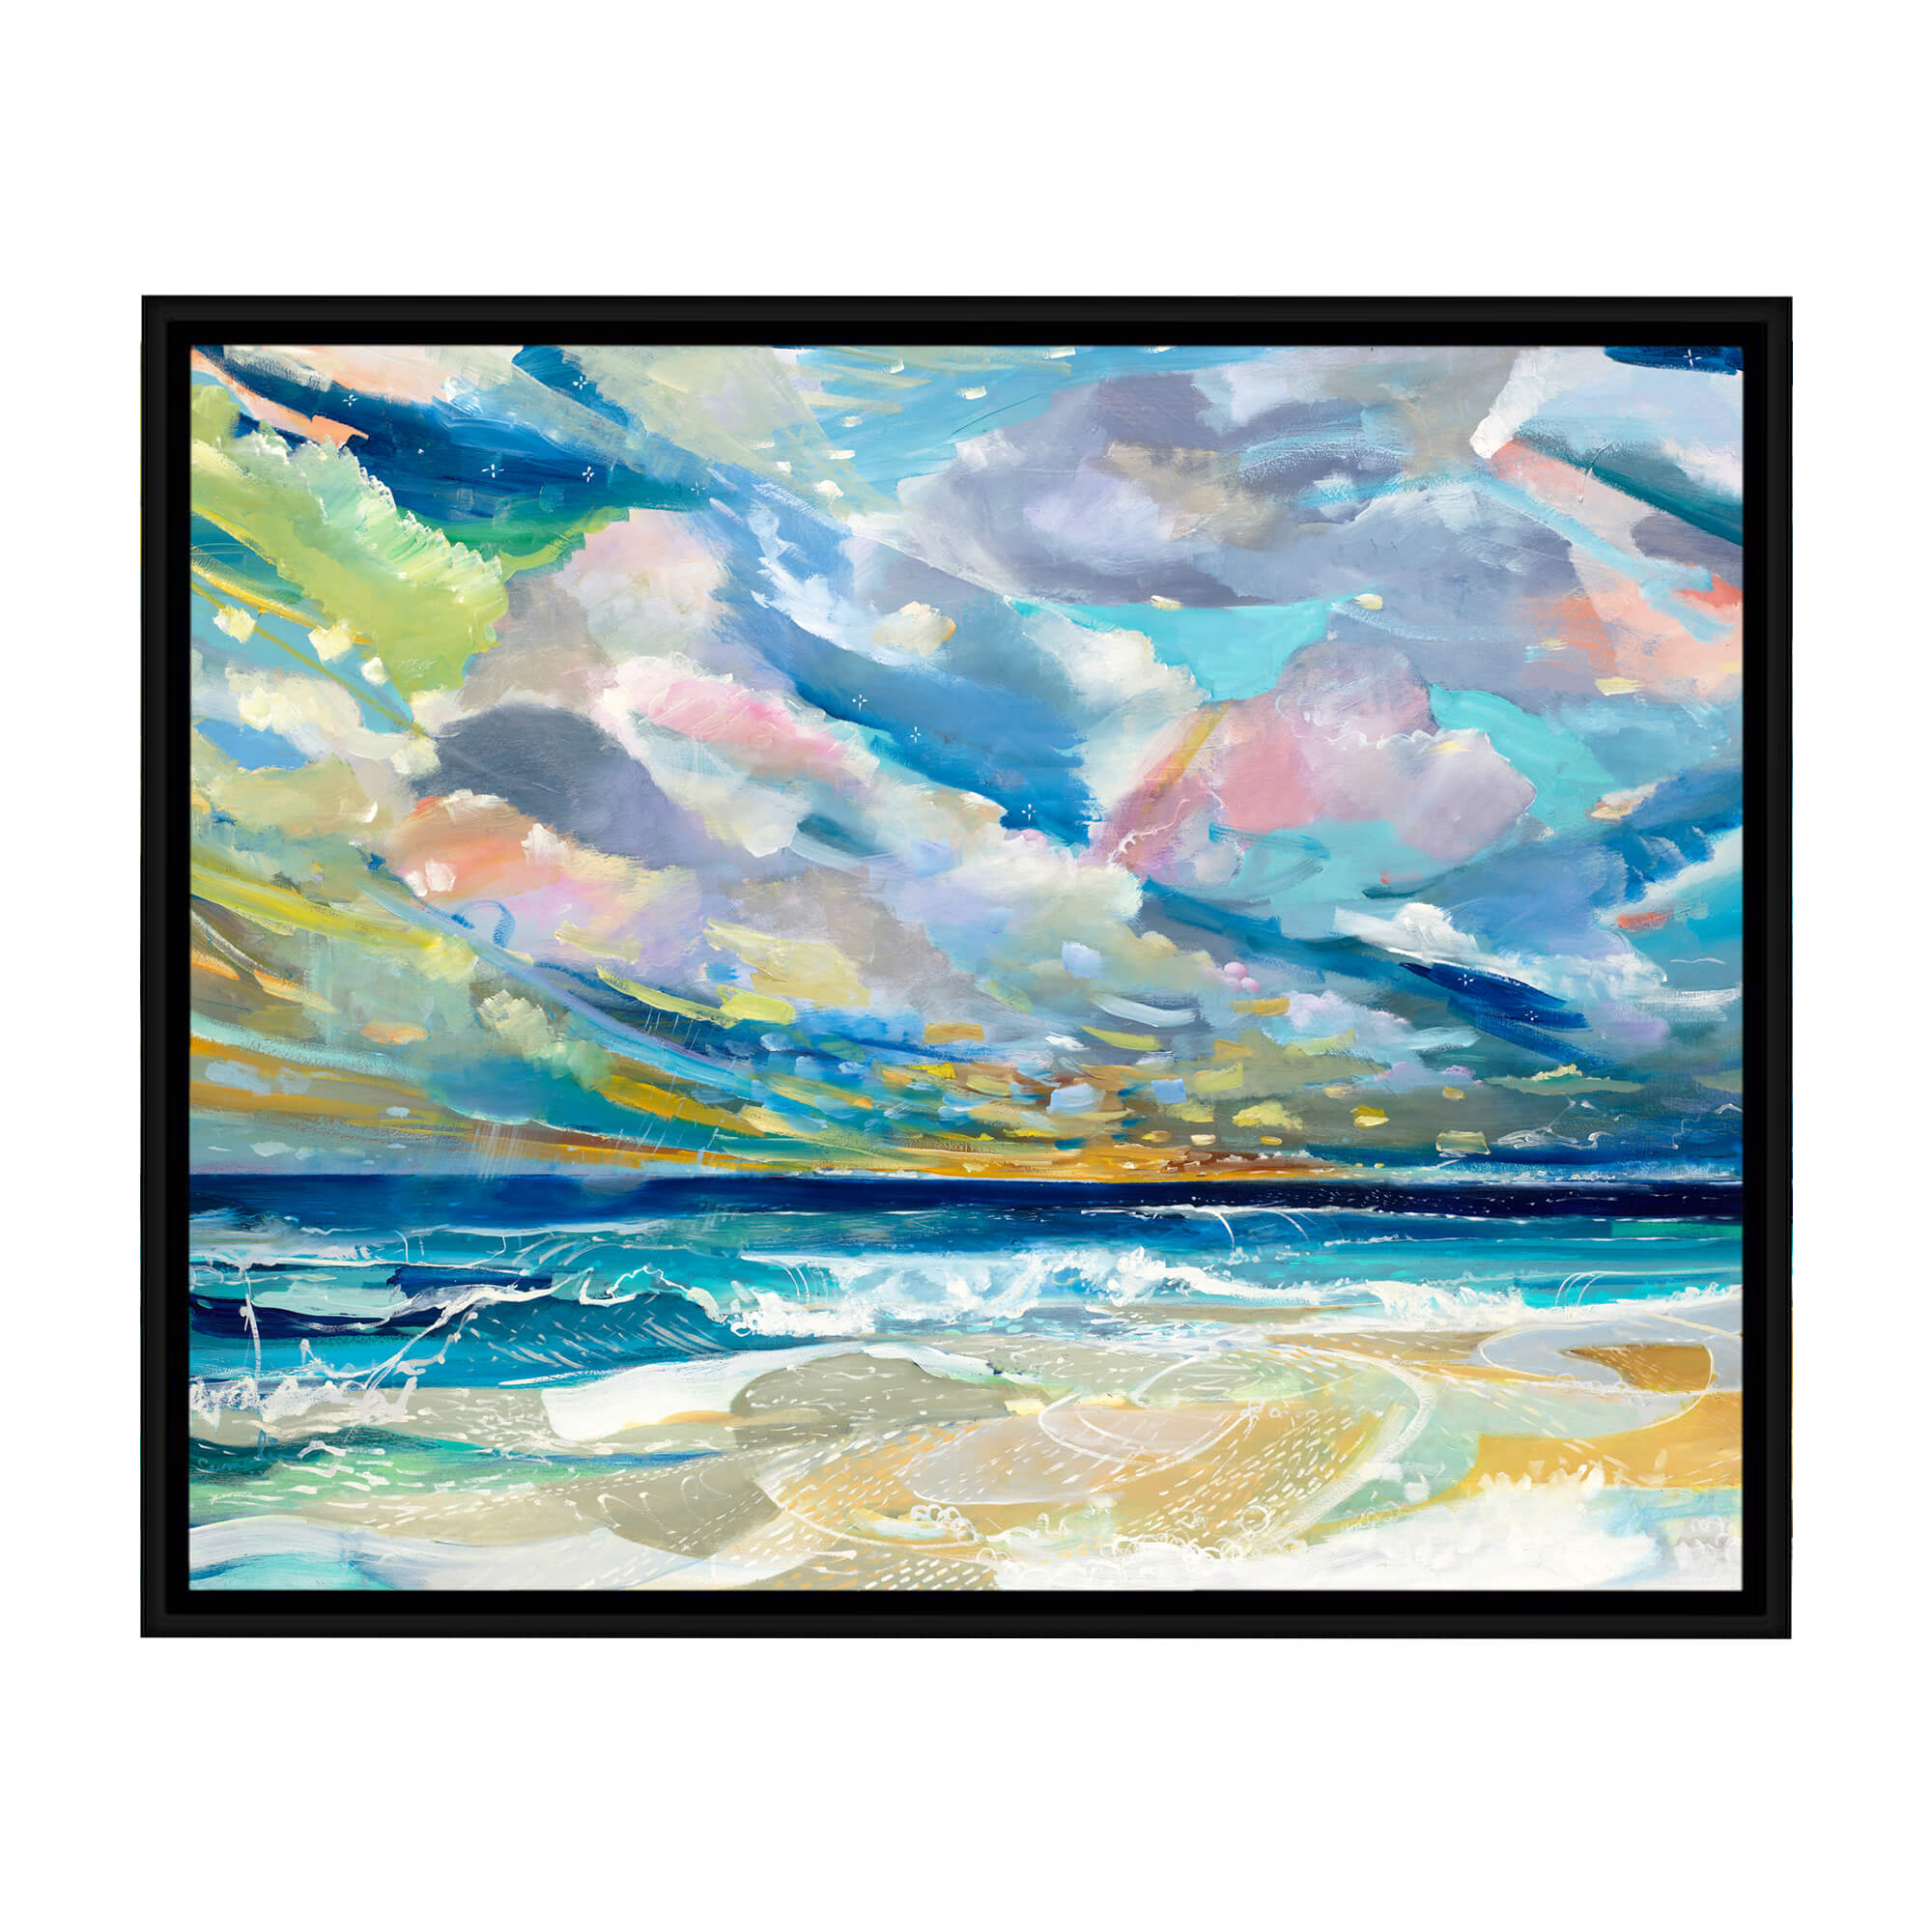 A framed canvas giclée art print featuring a colorful abstract ocean view by famed Hawaii artist Saumolia Puapuaga